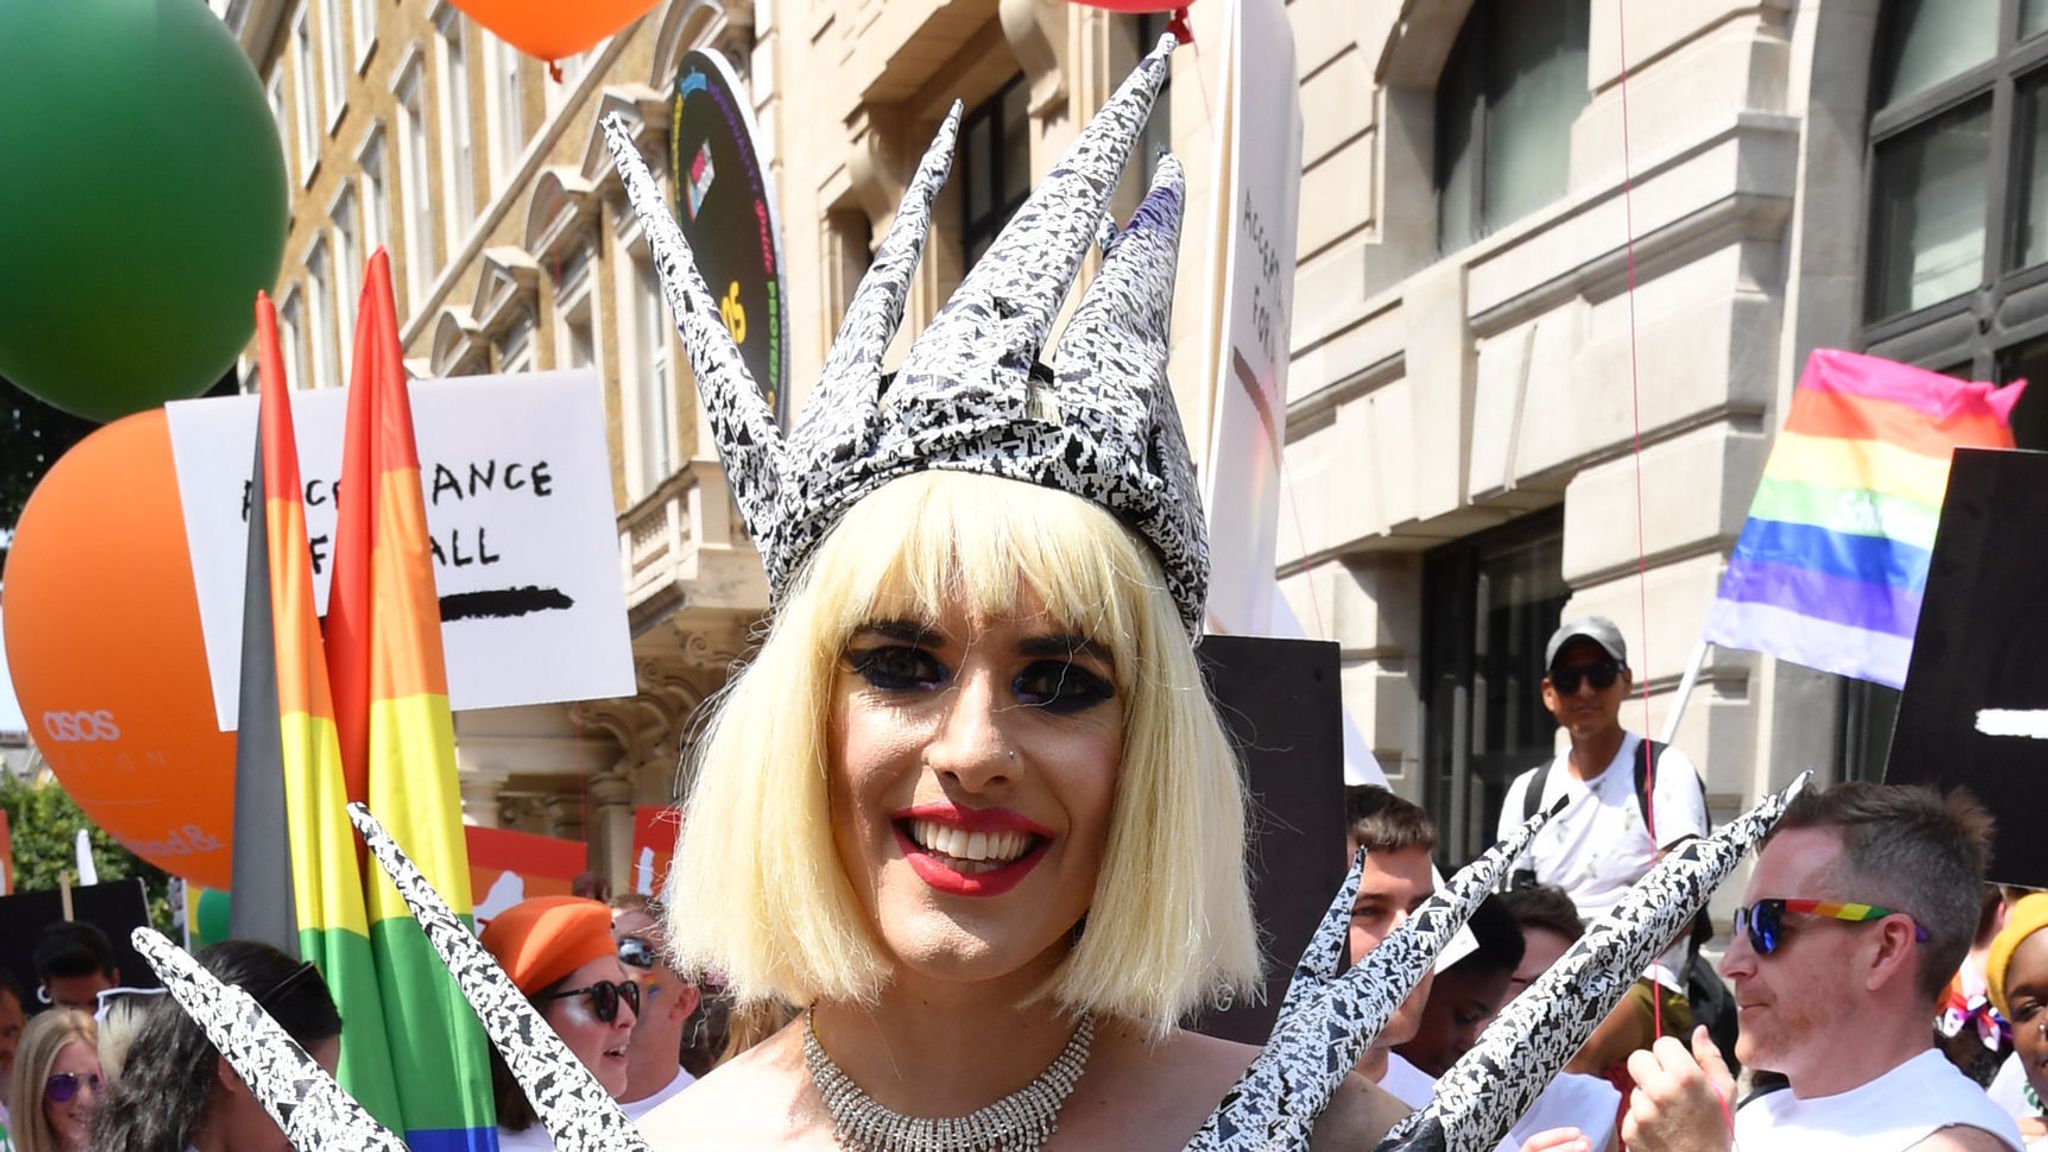 London Pride More than a million turn out to 'most diverse' parade